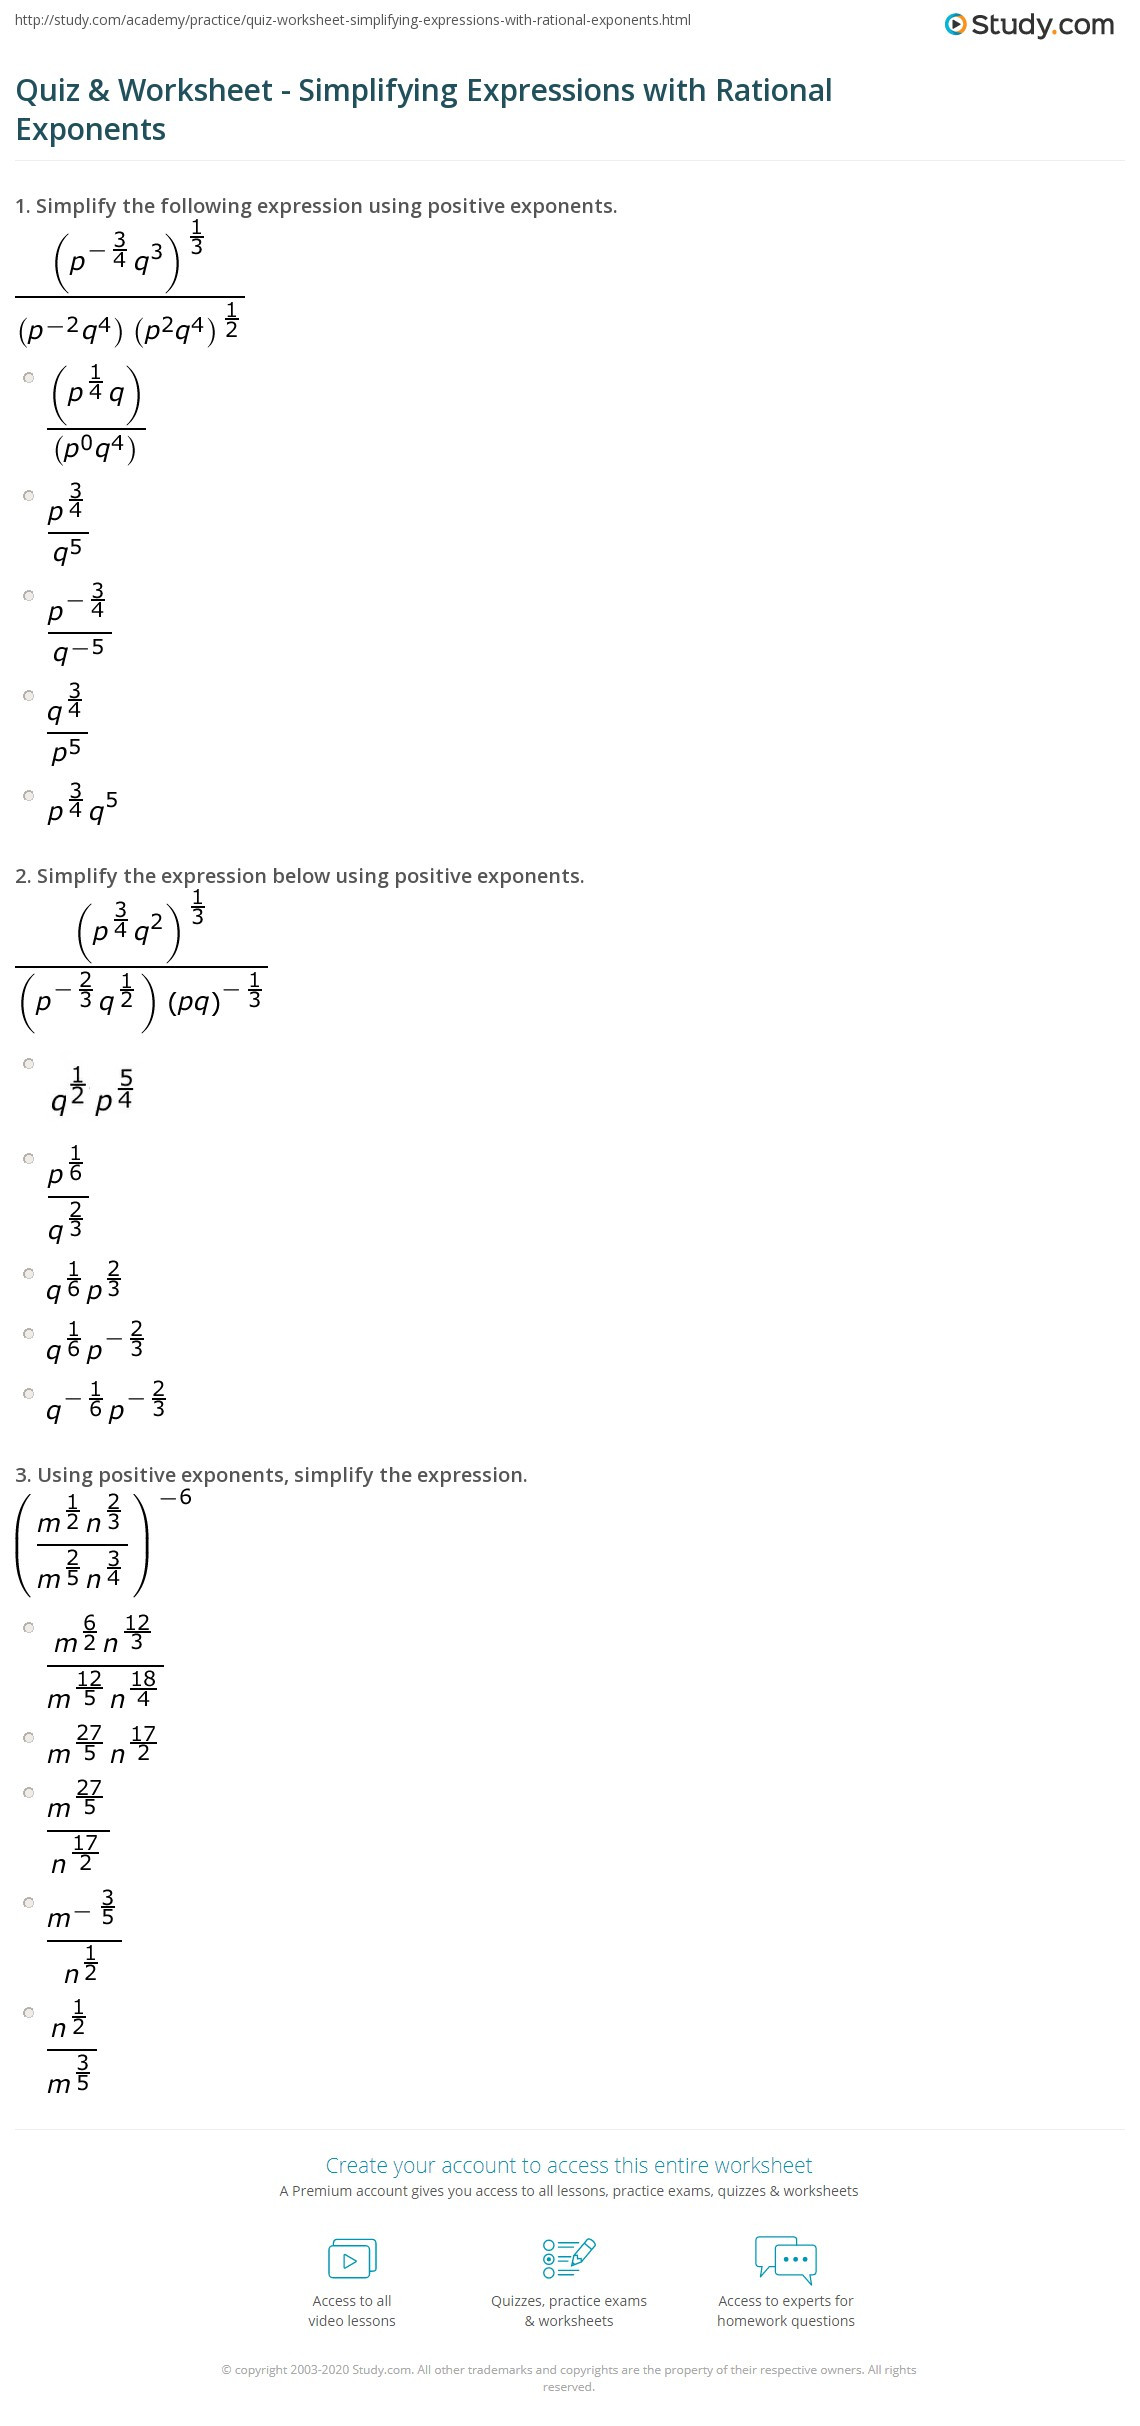 Simplifying Rational Expressions Worksheet Quiz &amp; Worksheet Simplifying Expressions with Rational